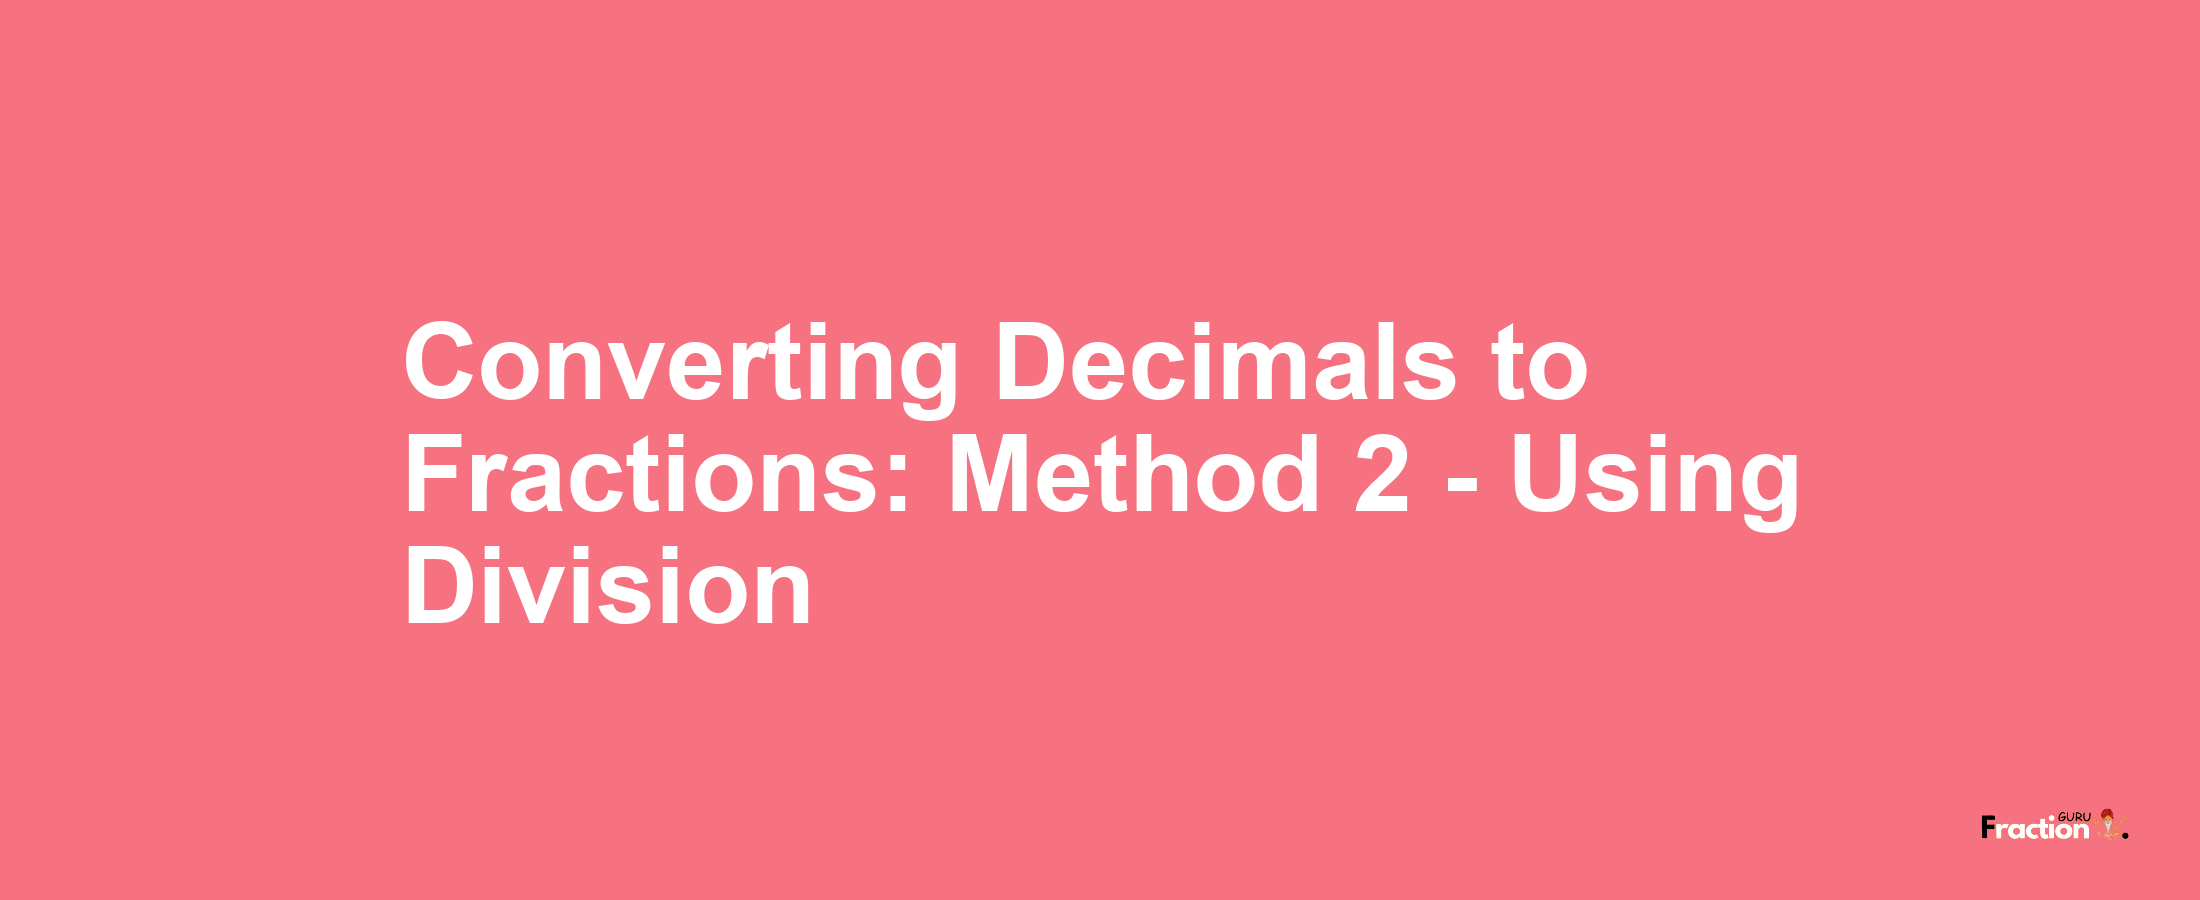 Converting Decimals to Fractions: Method 2 - Using Division